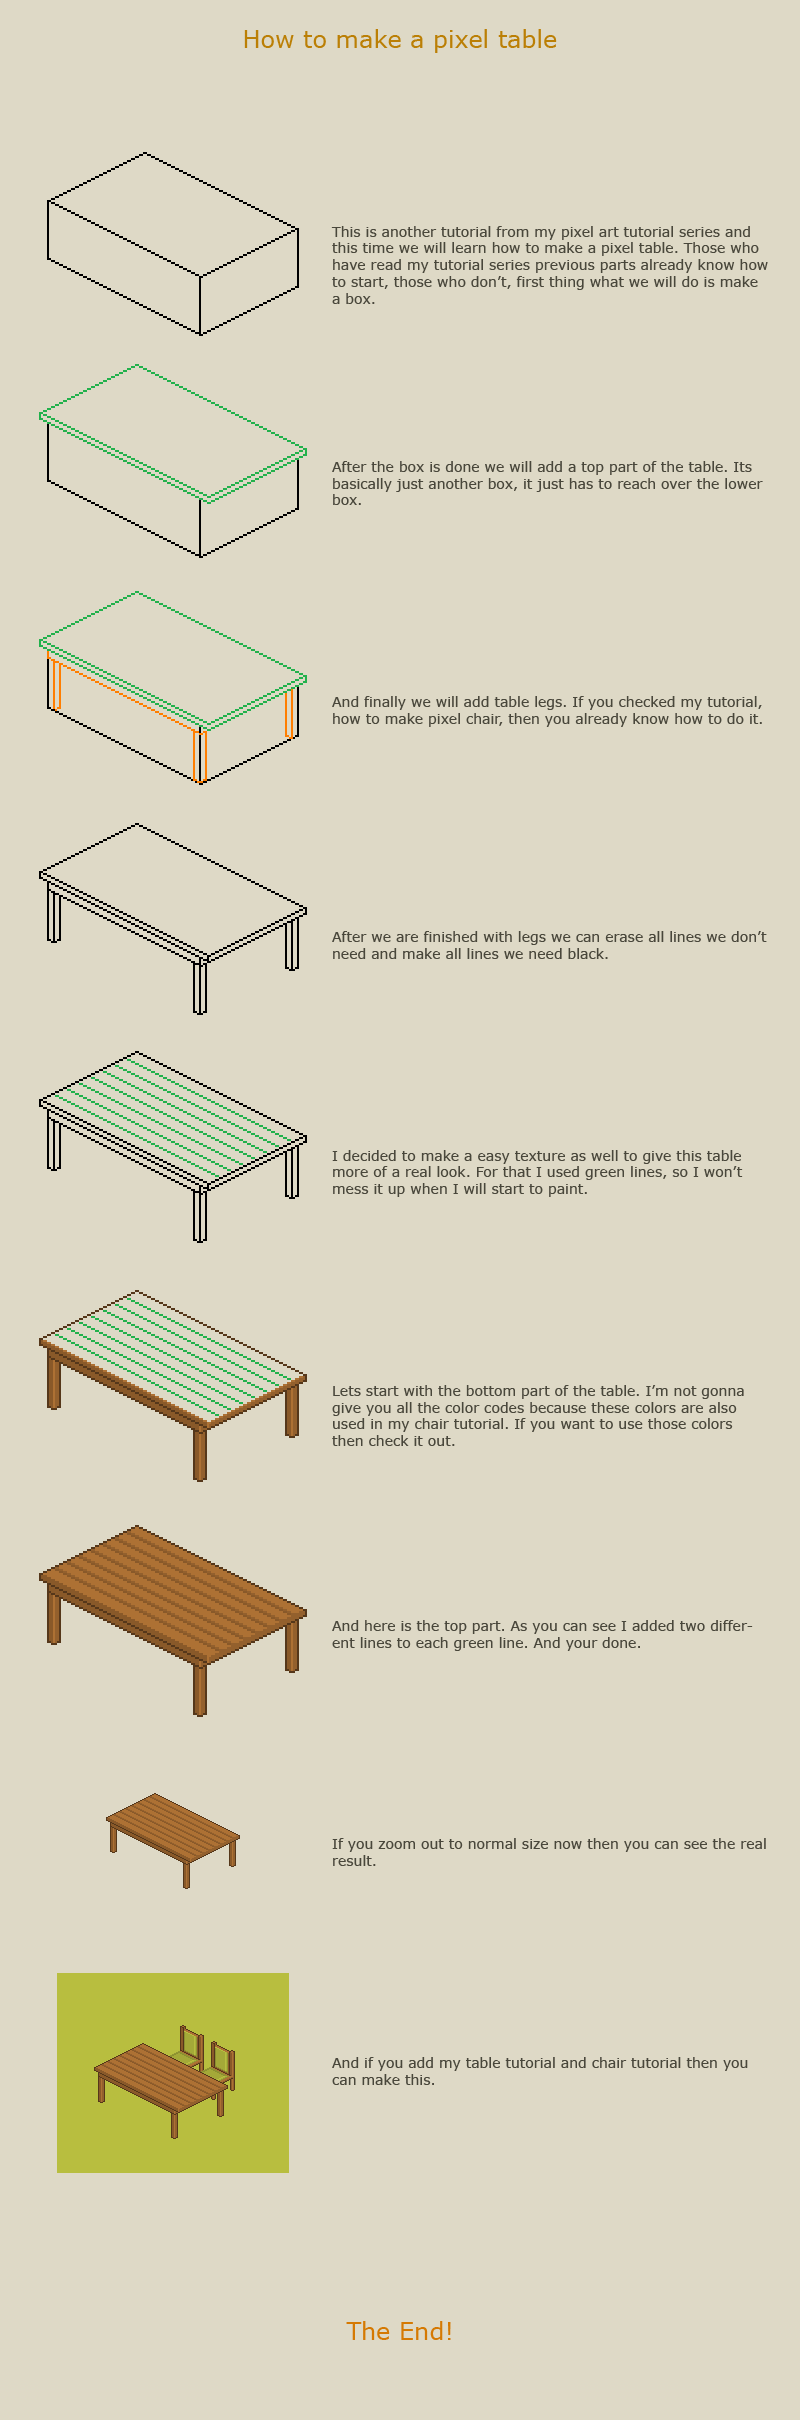 How to make a pixel table